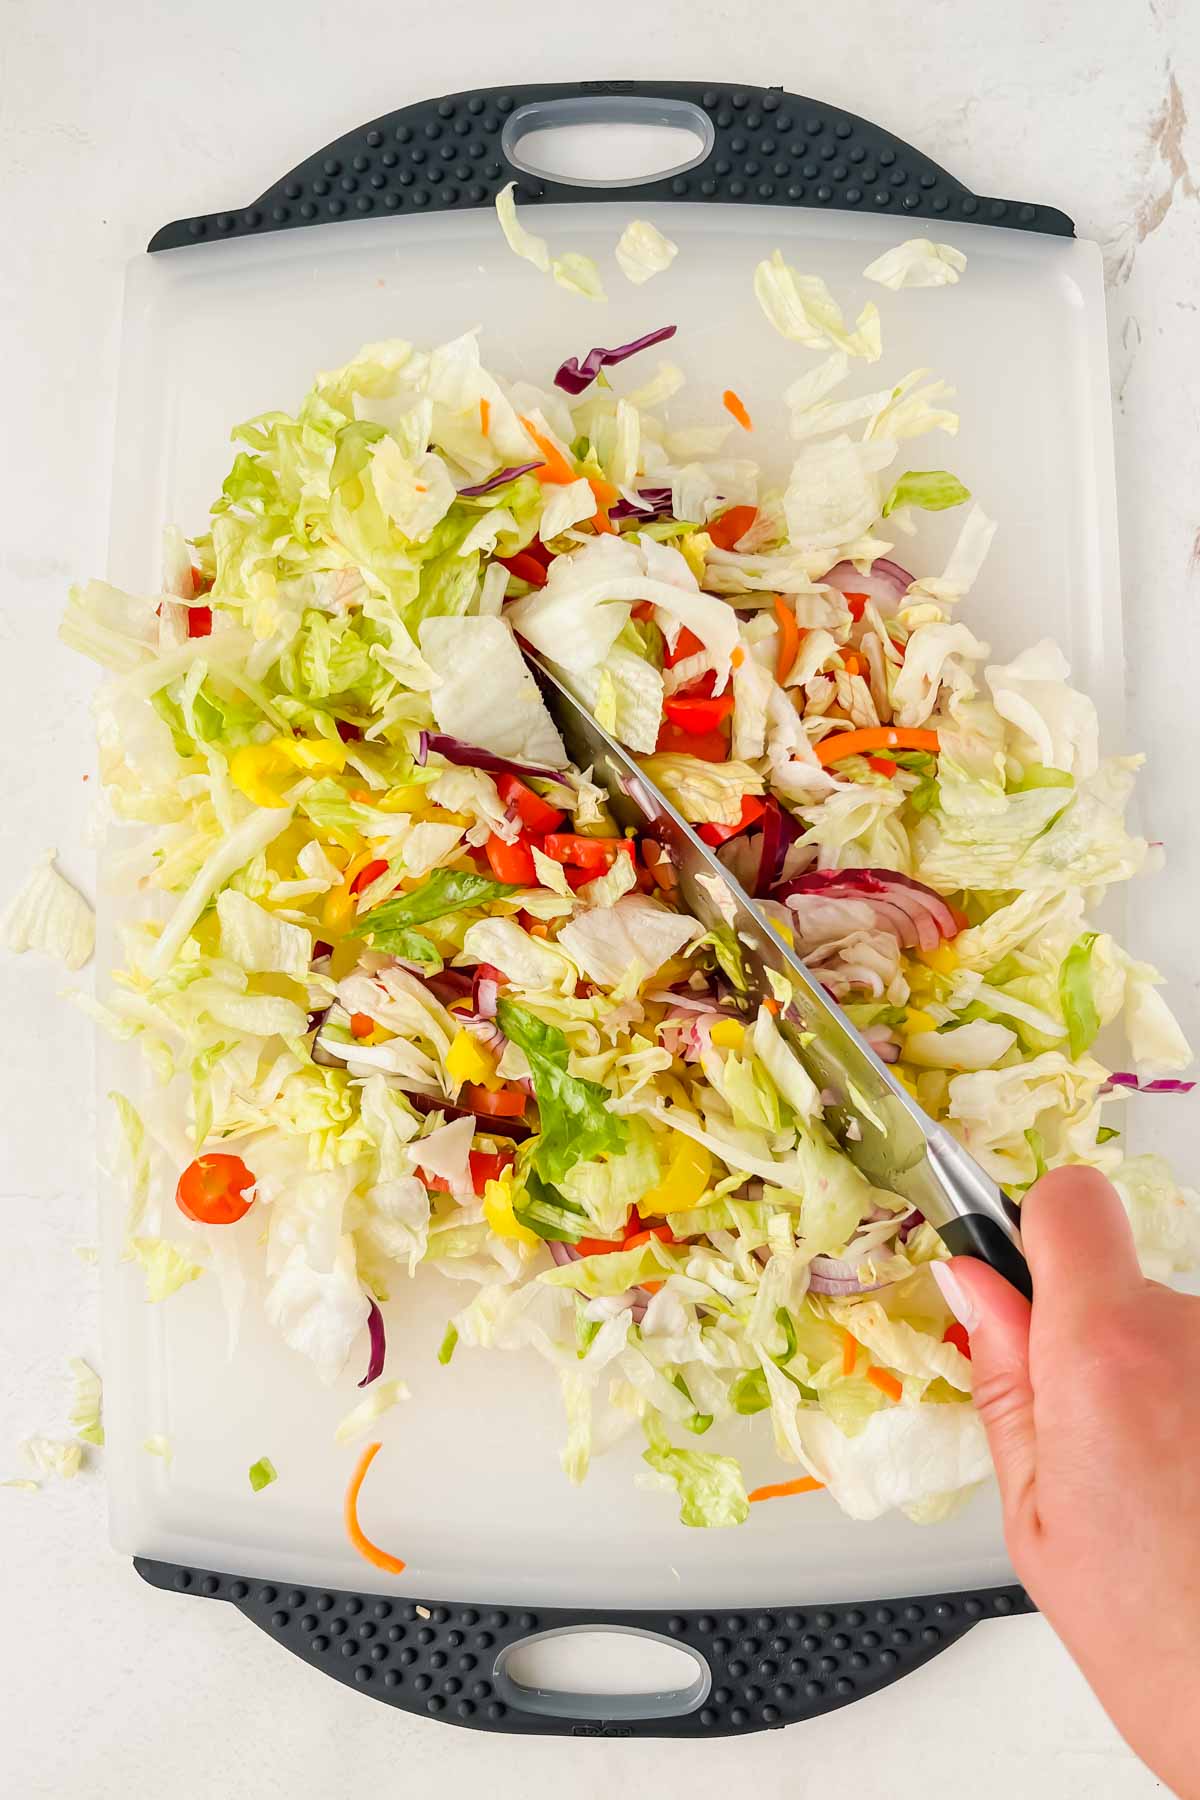 grinder chopped salad ingredients spread on white cutting board with knife chopping veggies.